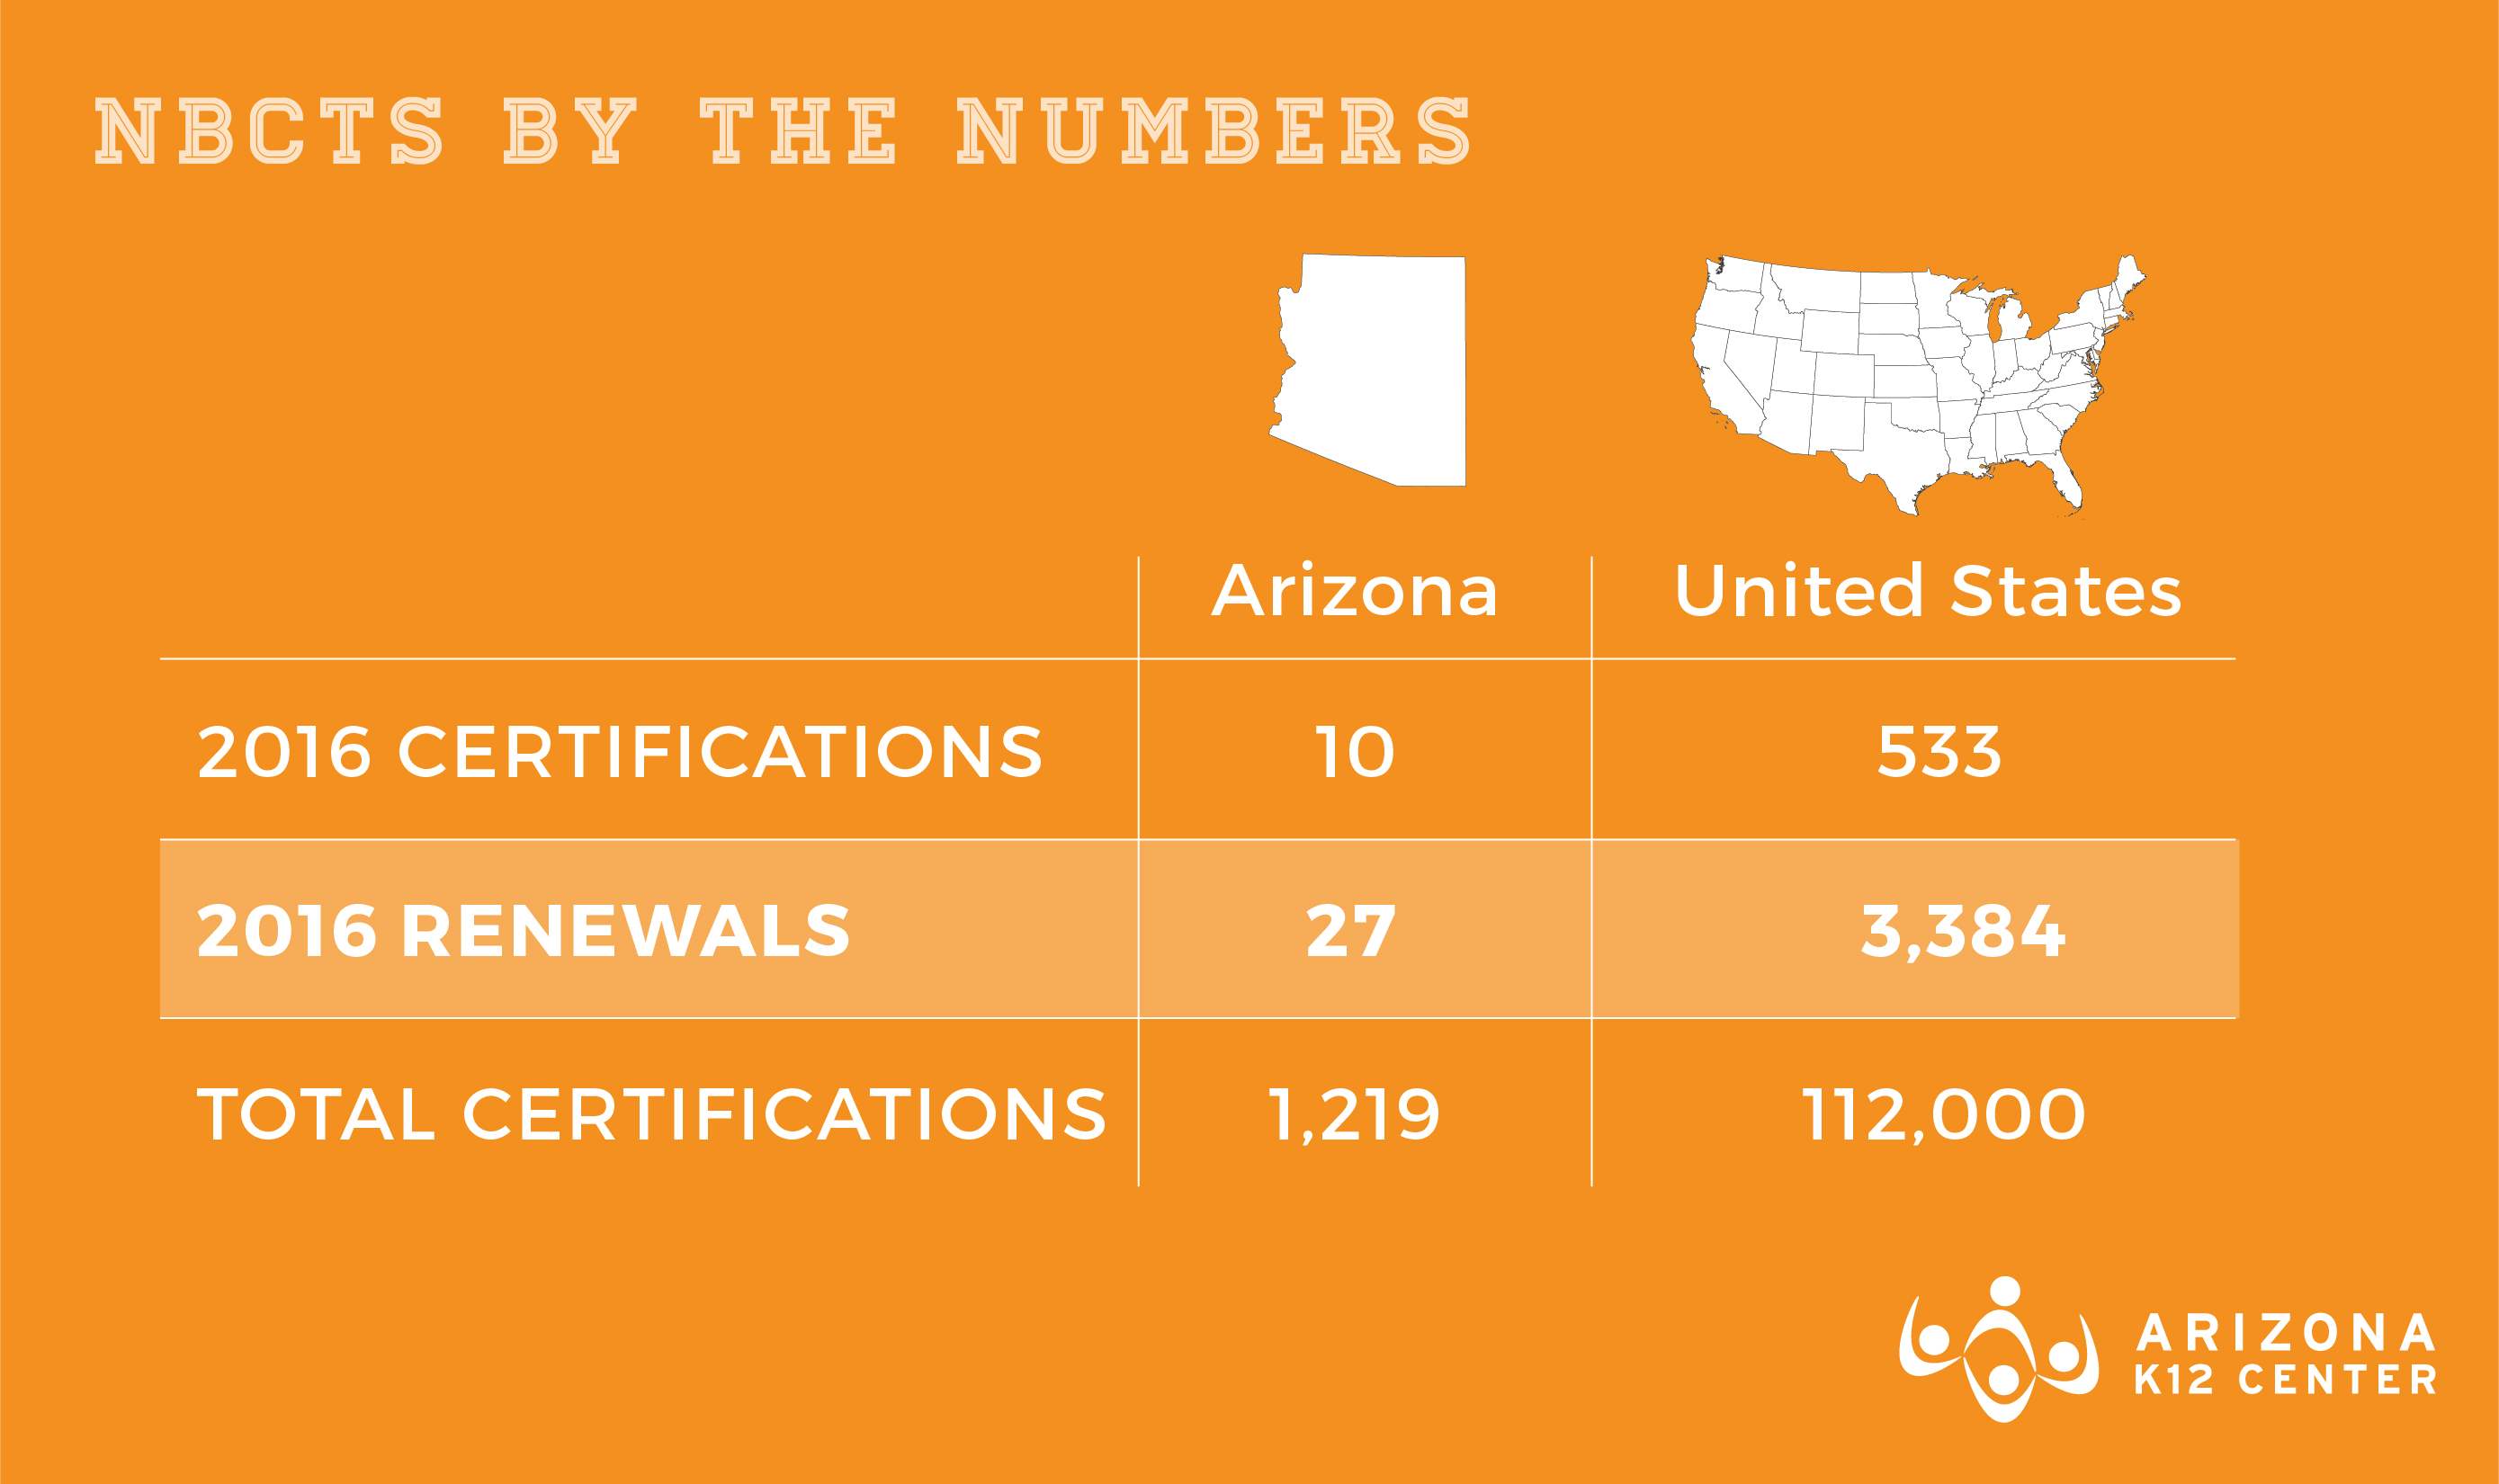 NBCTs by the Numbers